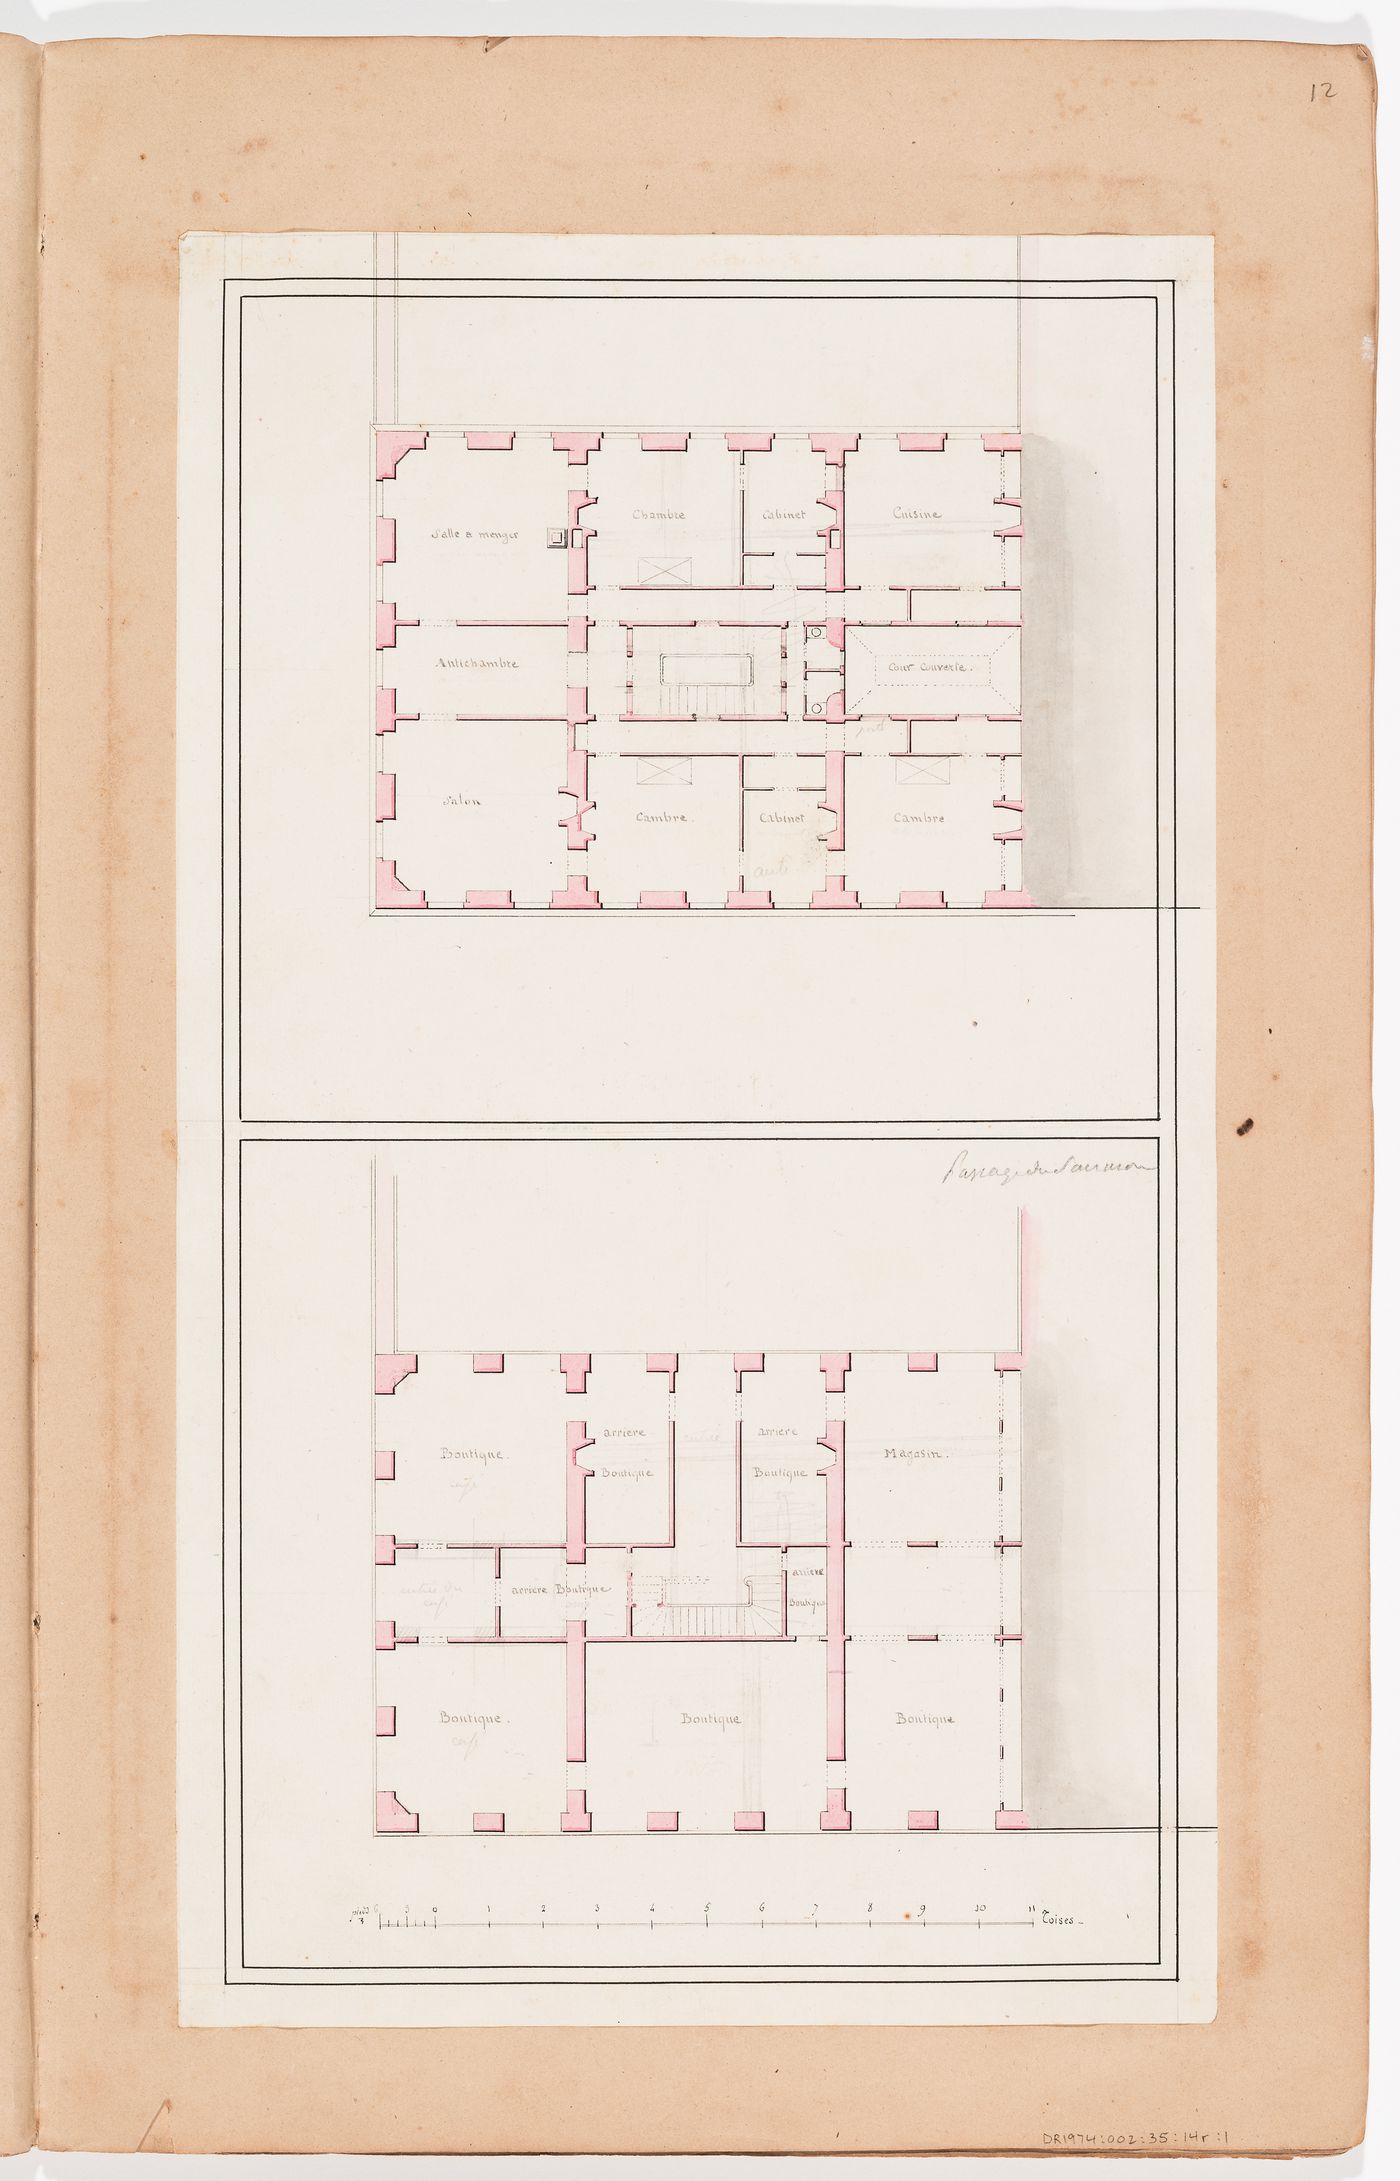 Ground and first floor plans for part of the Passage du saumon; verso: Sketch plan and elevation for a country house